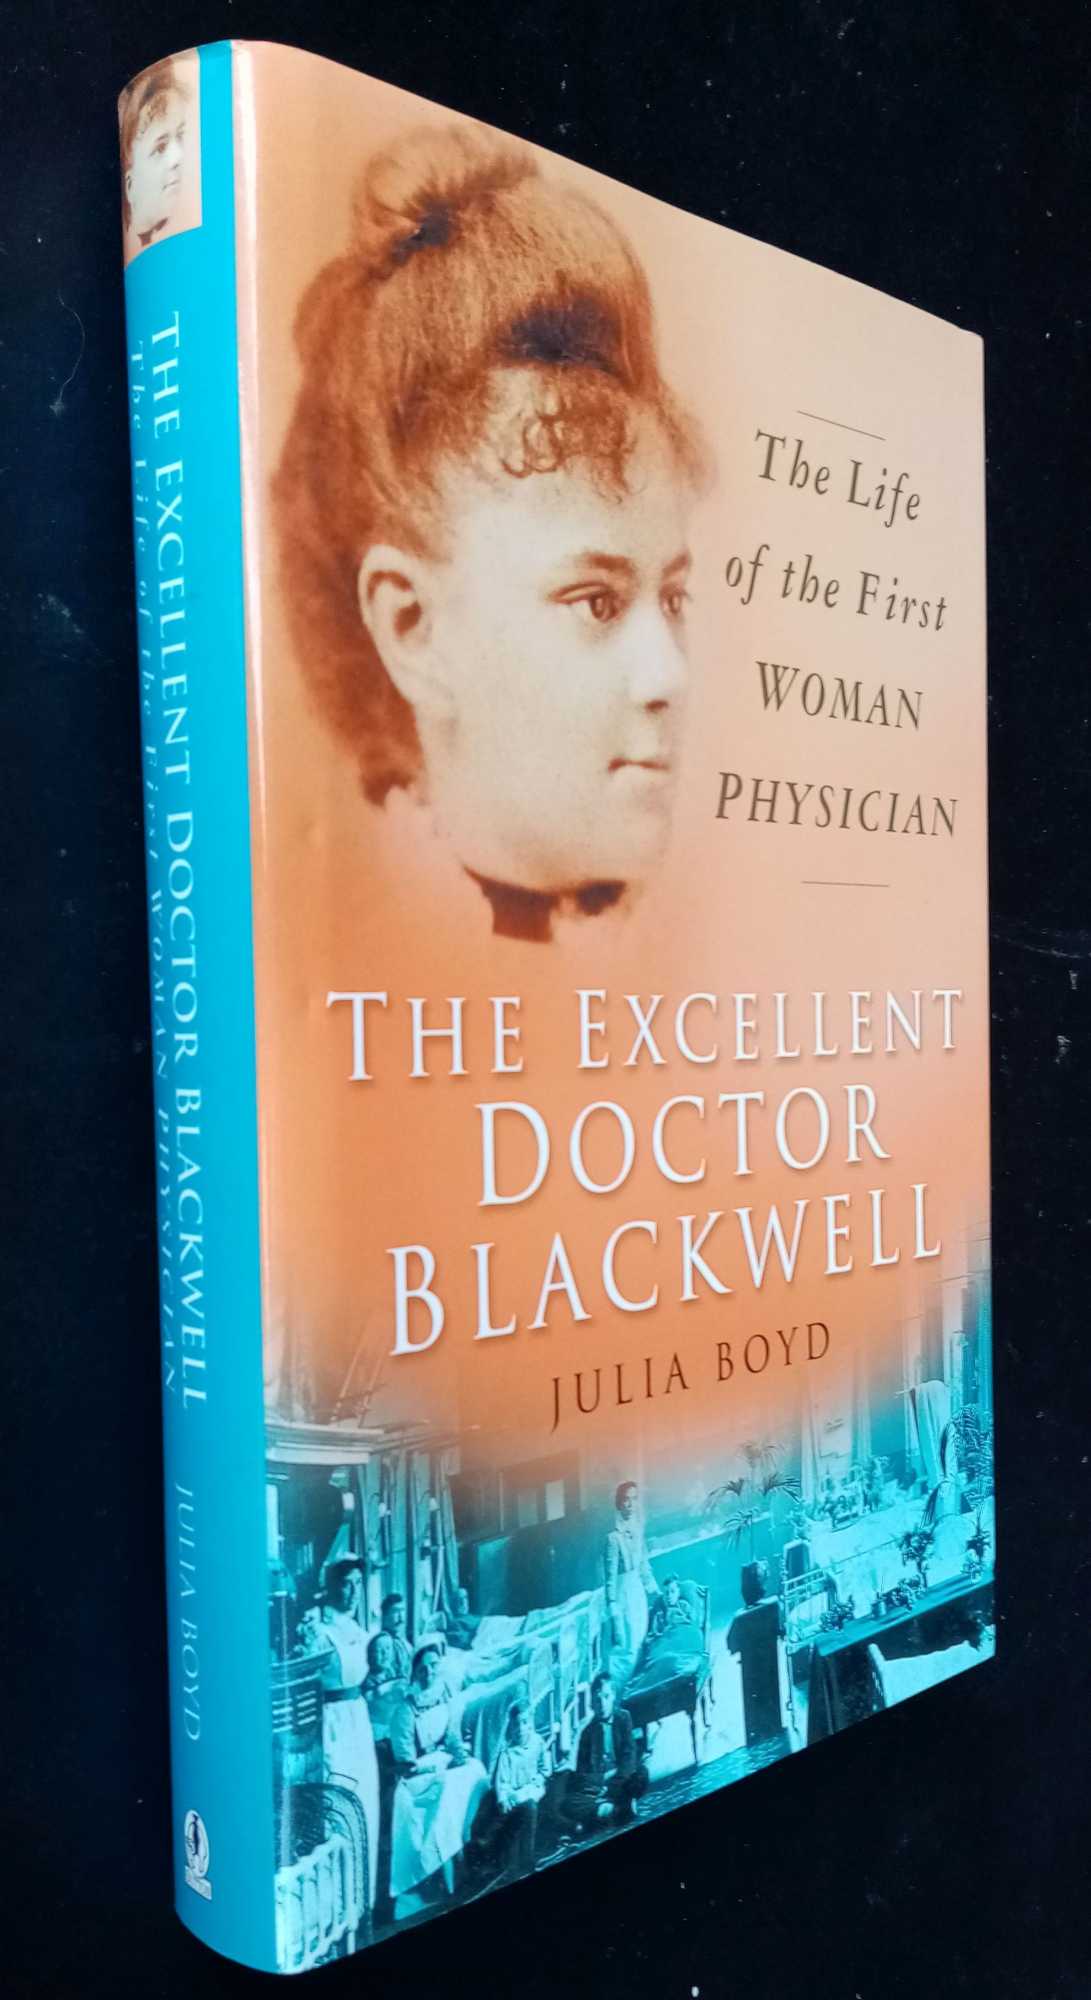 Julia Boyd - The Excellent Doctor Blackwell: The Life of the First Woman Physician